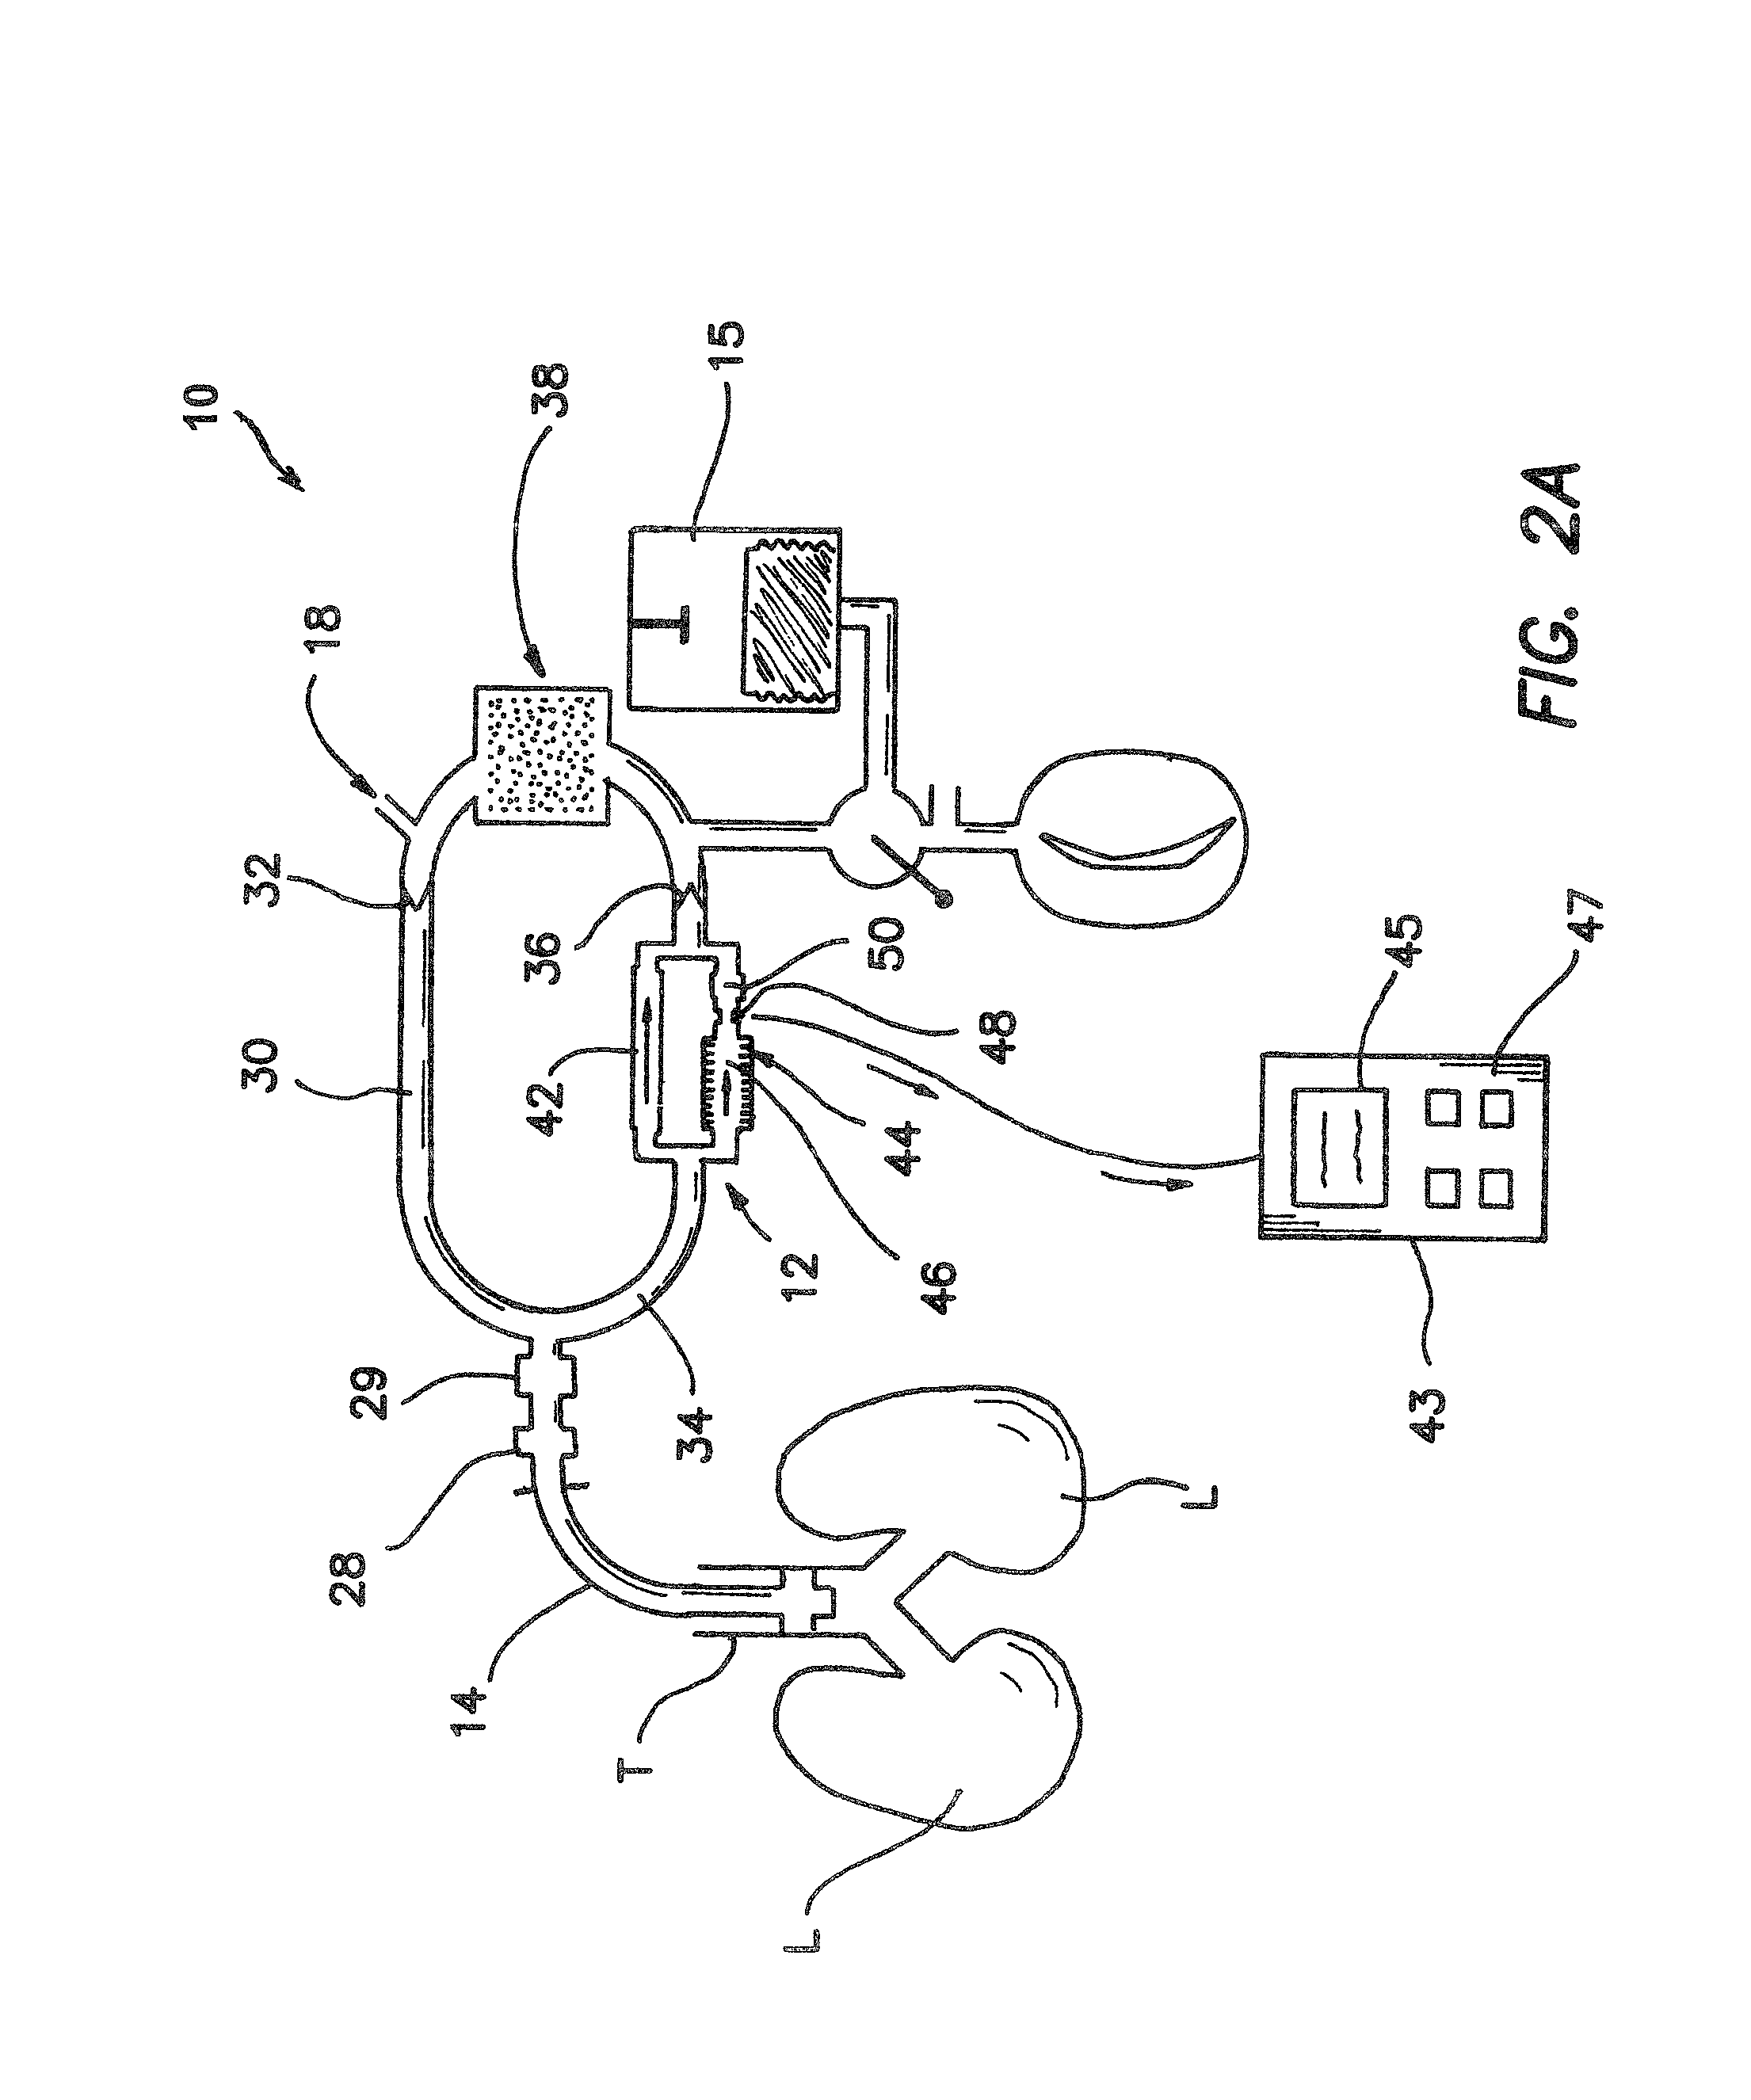 Bymixer apparatus and method for fast-response, adjustable measurement of mixed gas fractions in ventilation circuits